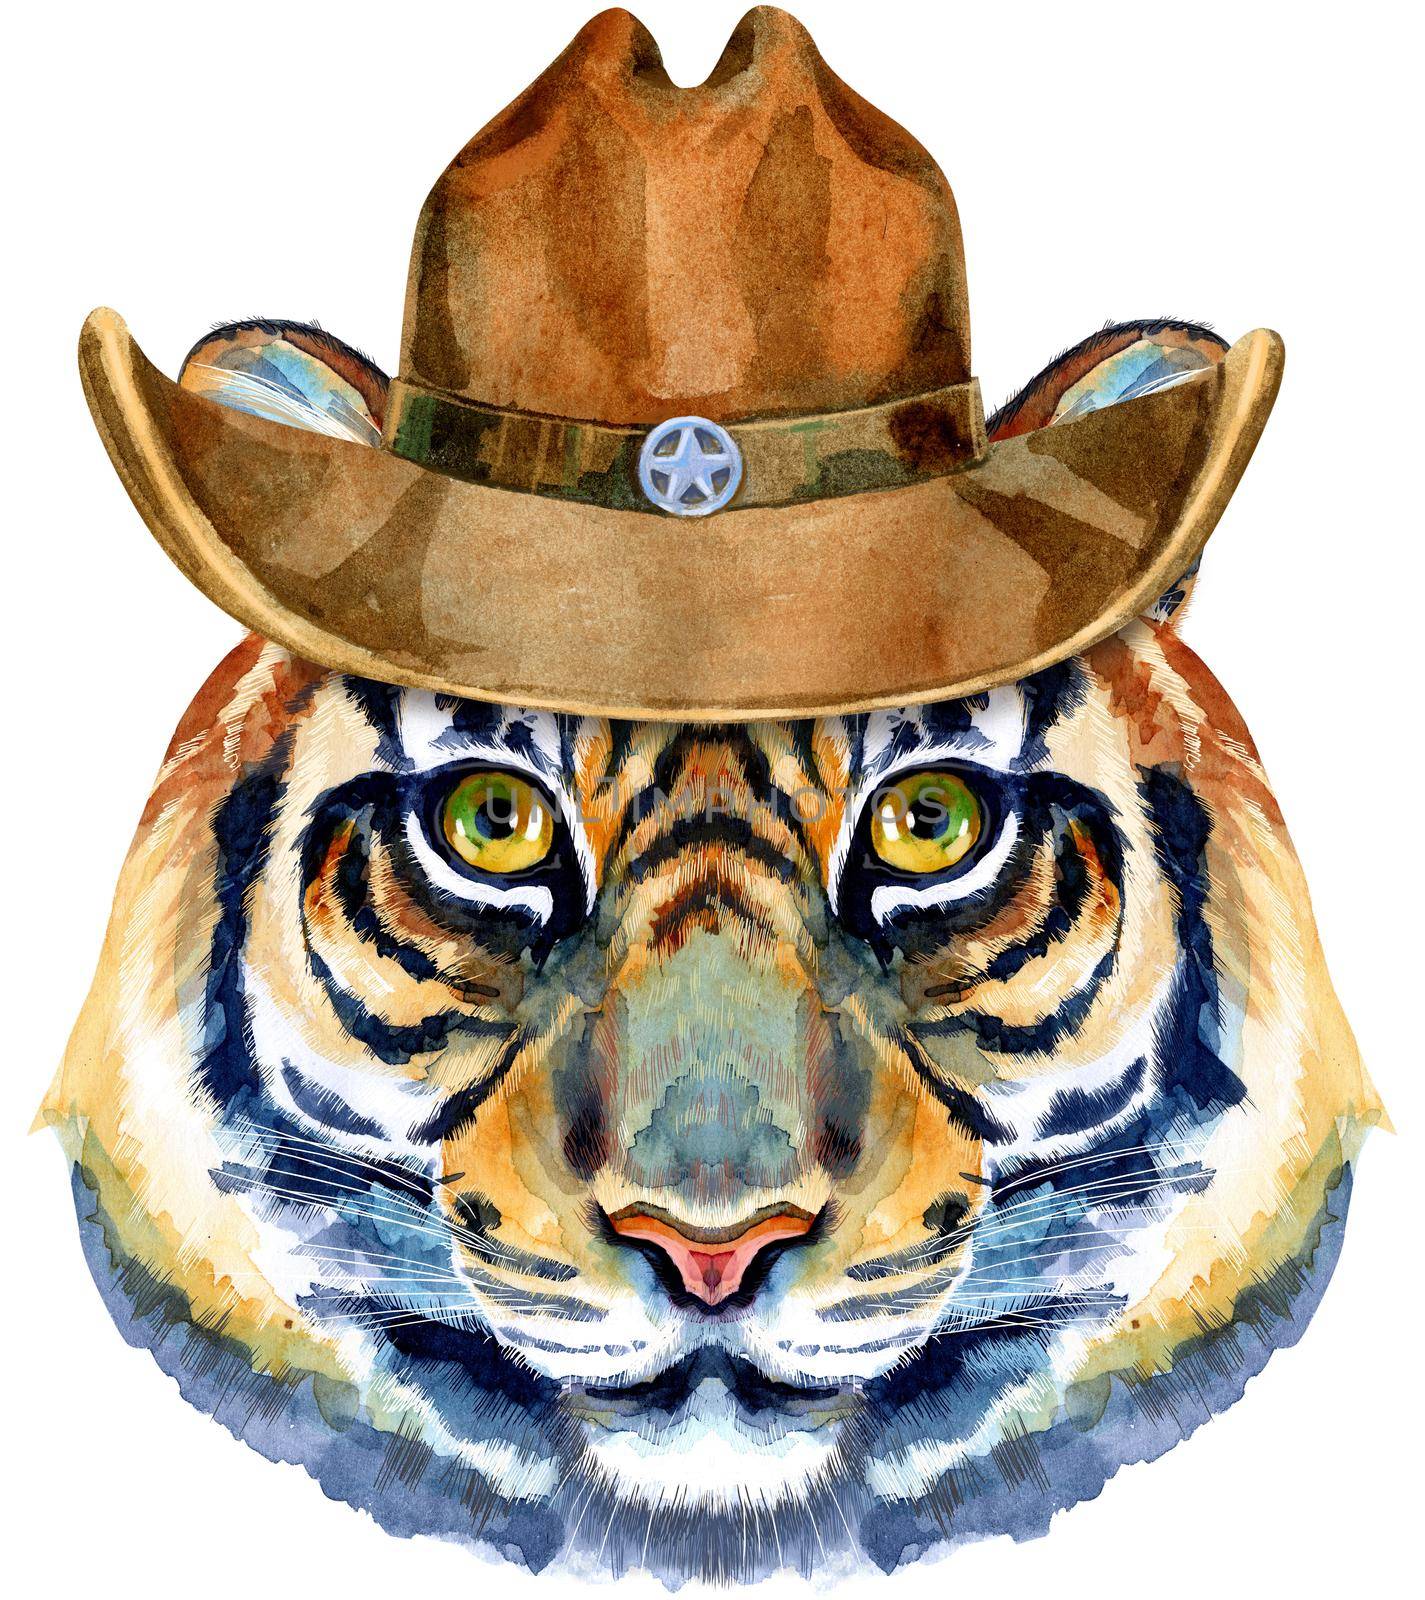 Tiger head horoscope character in cowboy hat isolated on white background.